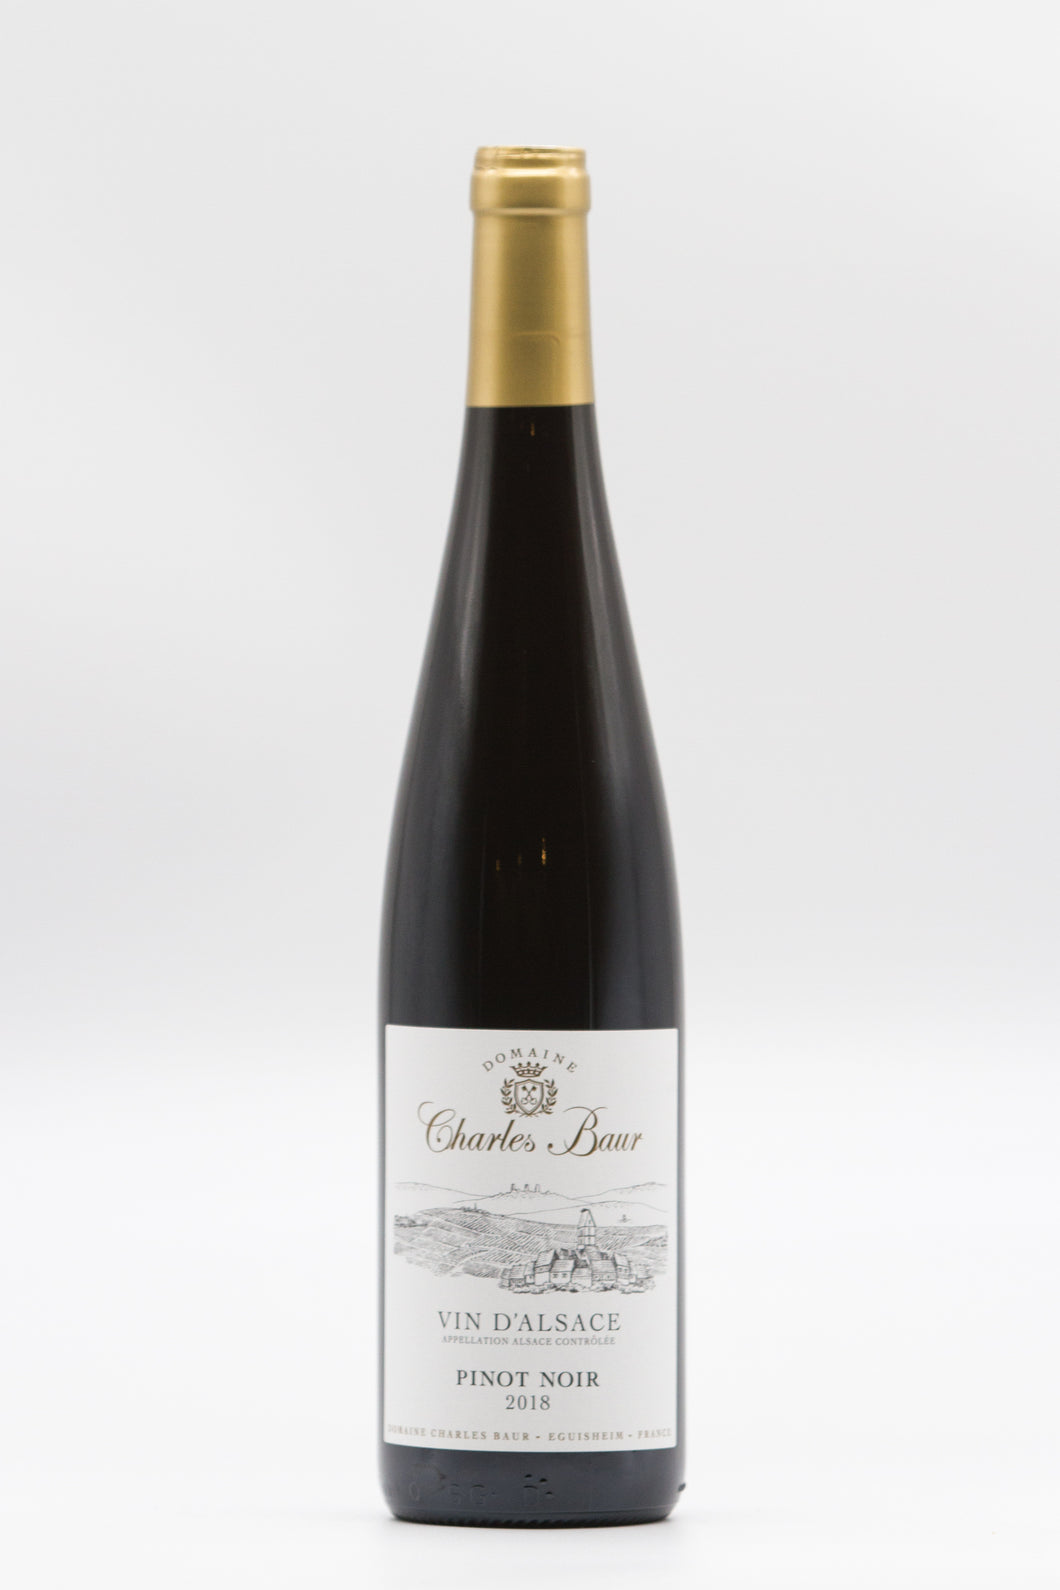 Photo of a bottle of Pinot Noir Charles Baur 2018